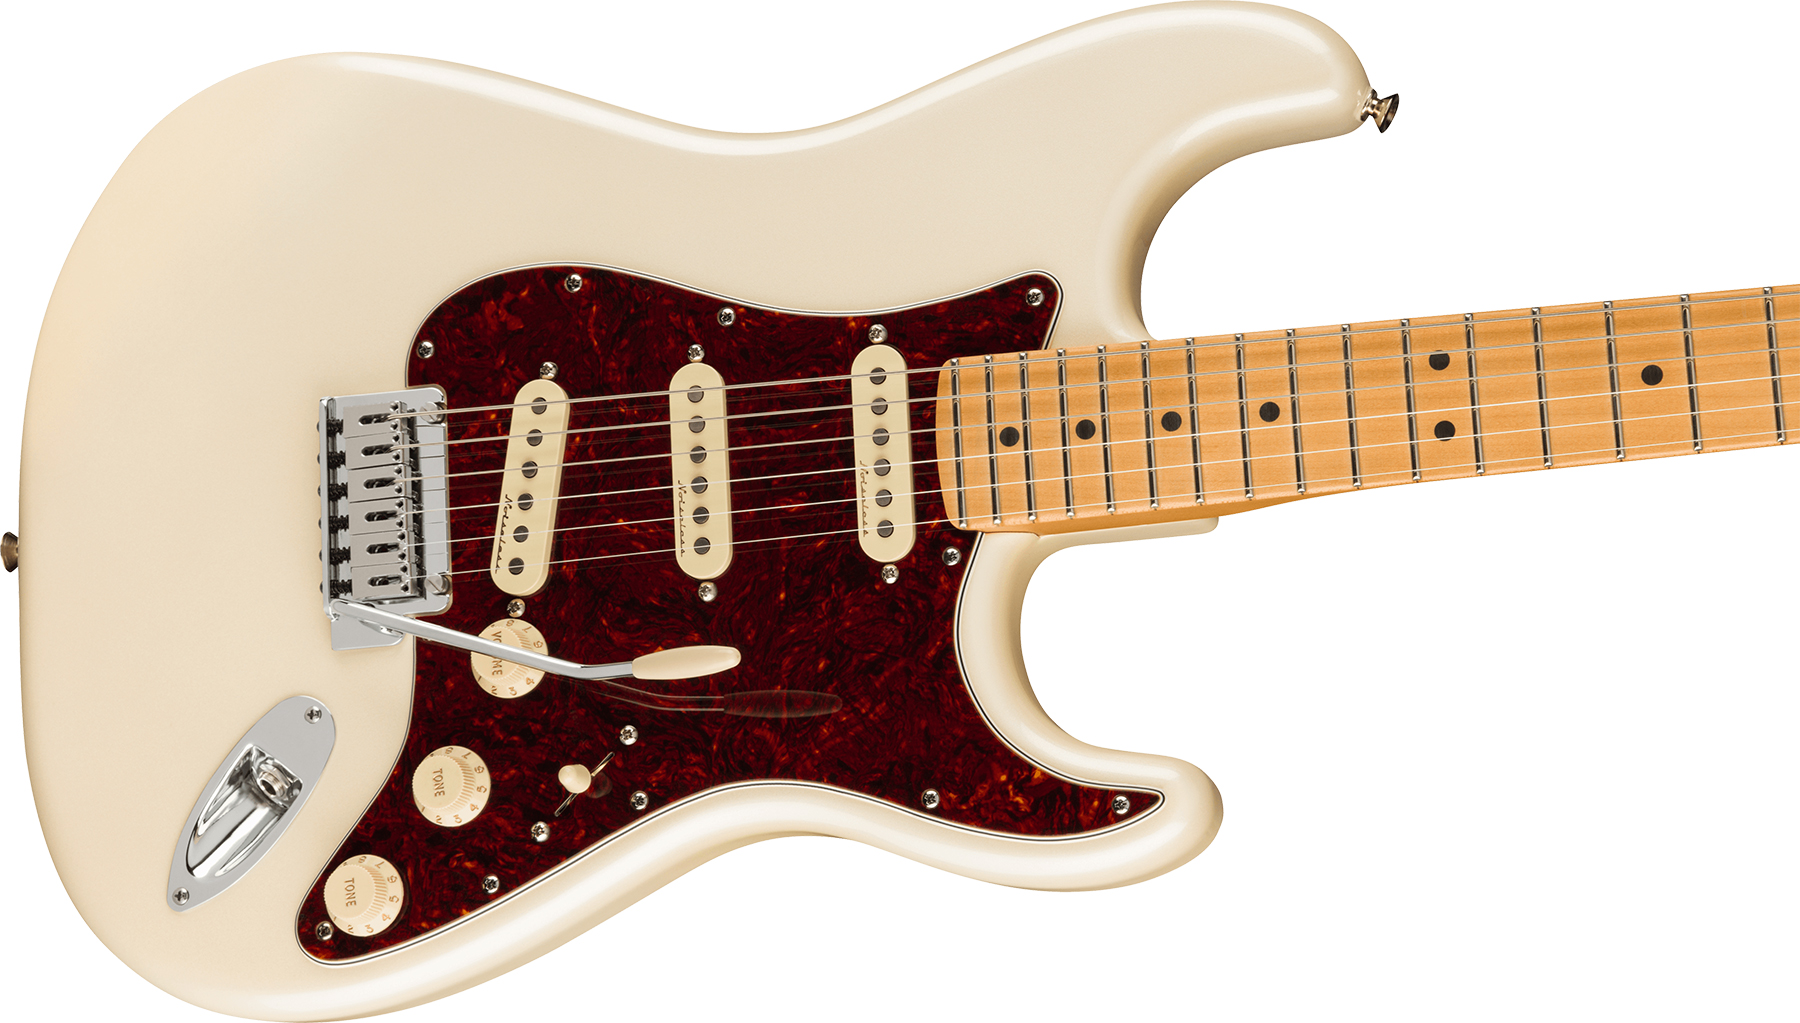 Fender Strat Player Plus Lh Mex Gaucher 3s Trem Mn - Olympic Pearl - Left-handed electric guitar - Variation 2